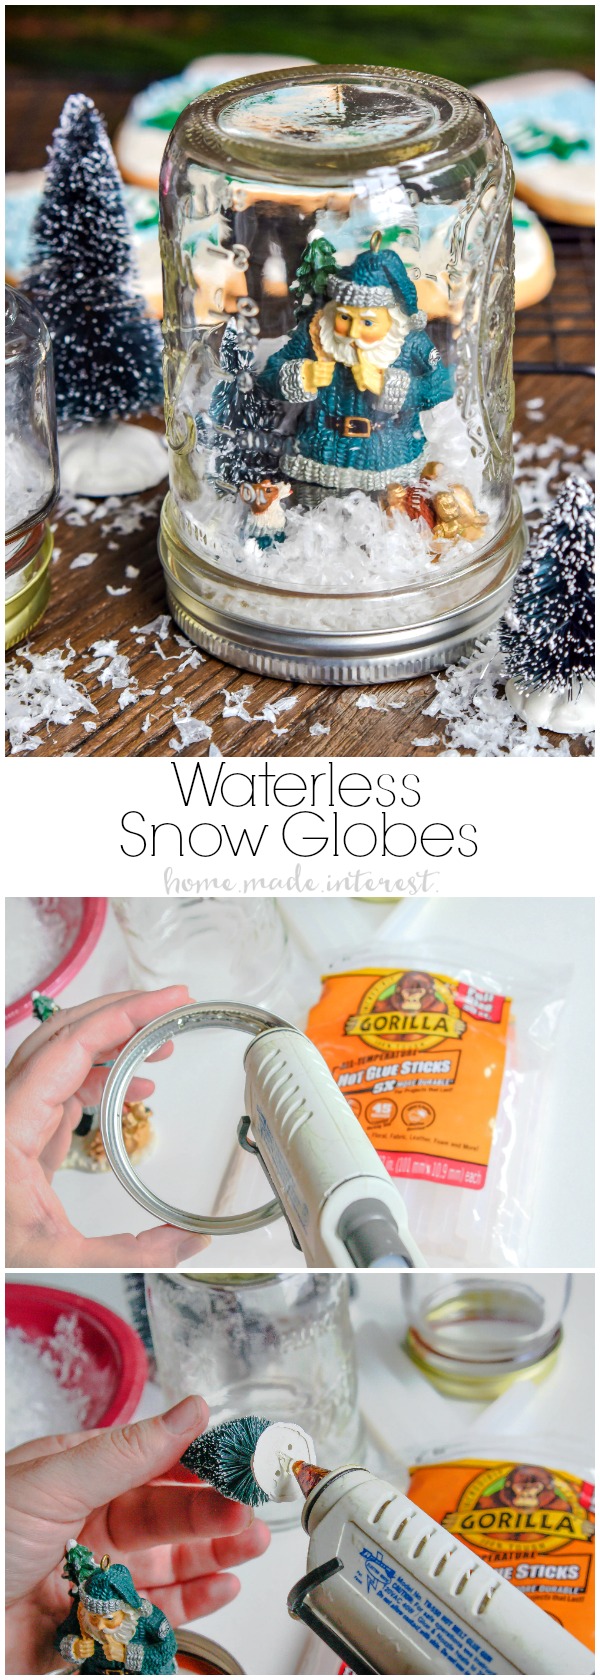 We have a simple tutorial for DIY Waterless Snow Globes made with mason jars. Mason jar snow globes are so much fun and these don’t require any water. We even made matching snow globe cookies that we decorated and served to the kids while we worked on our DIY snow globes!